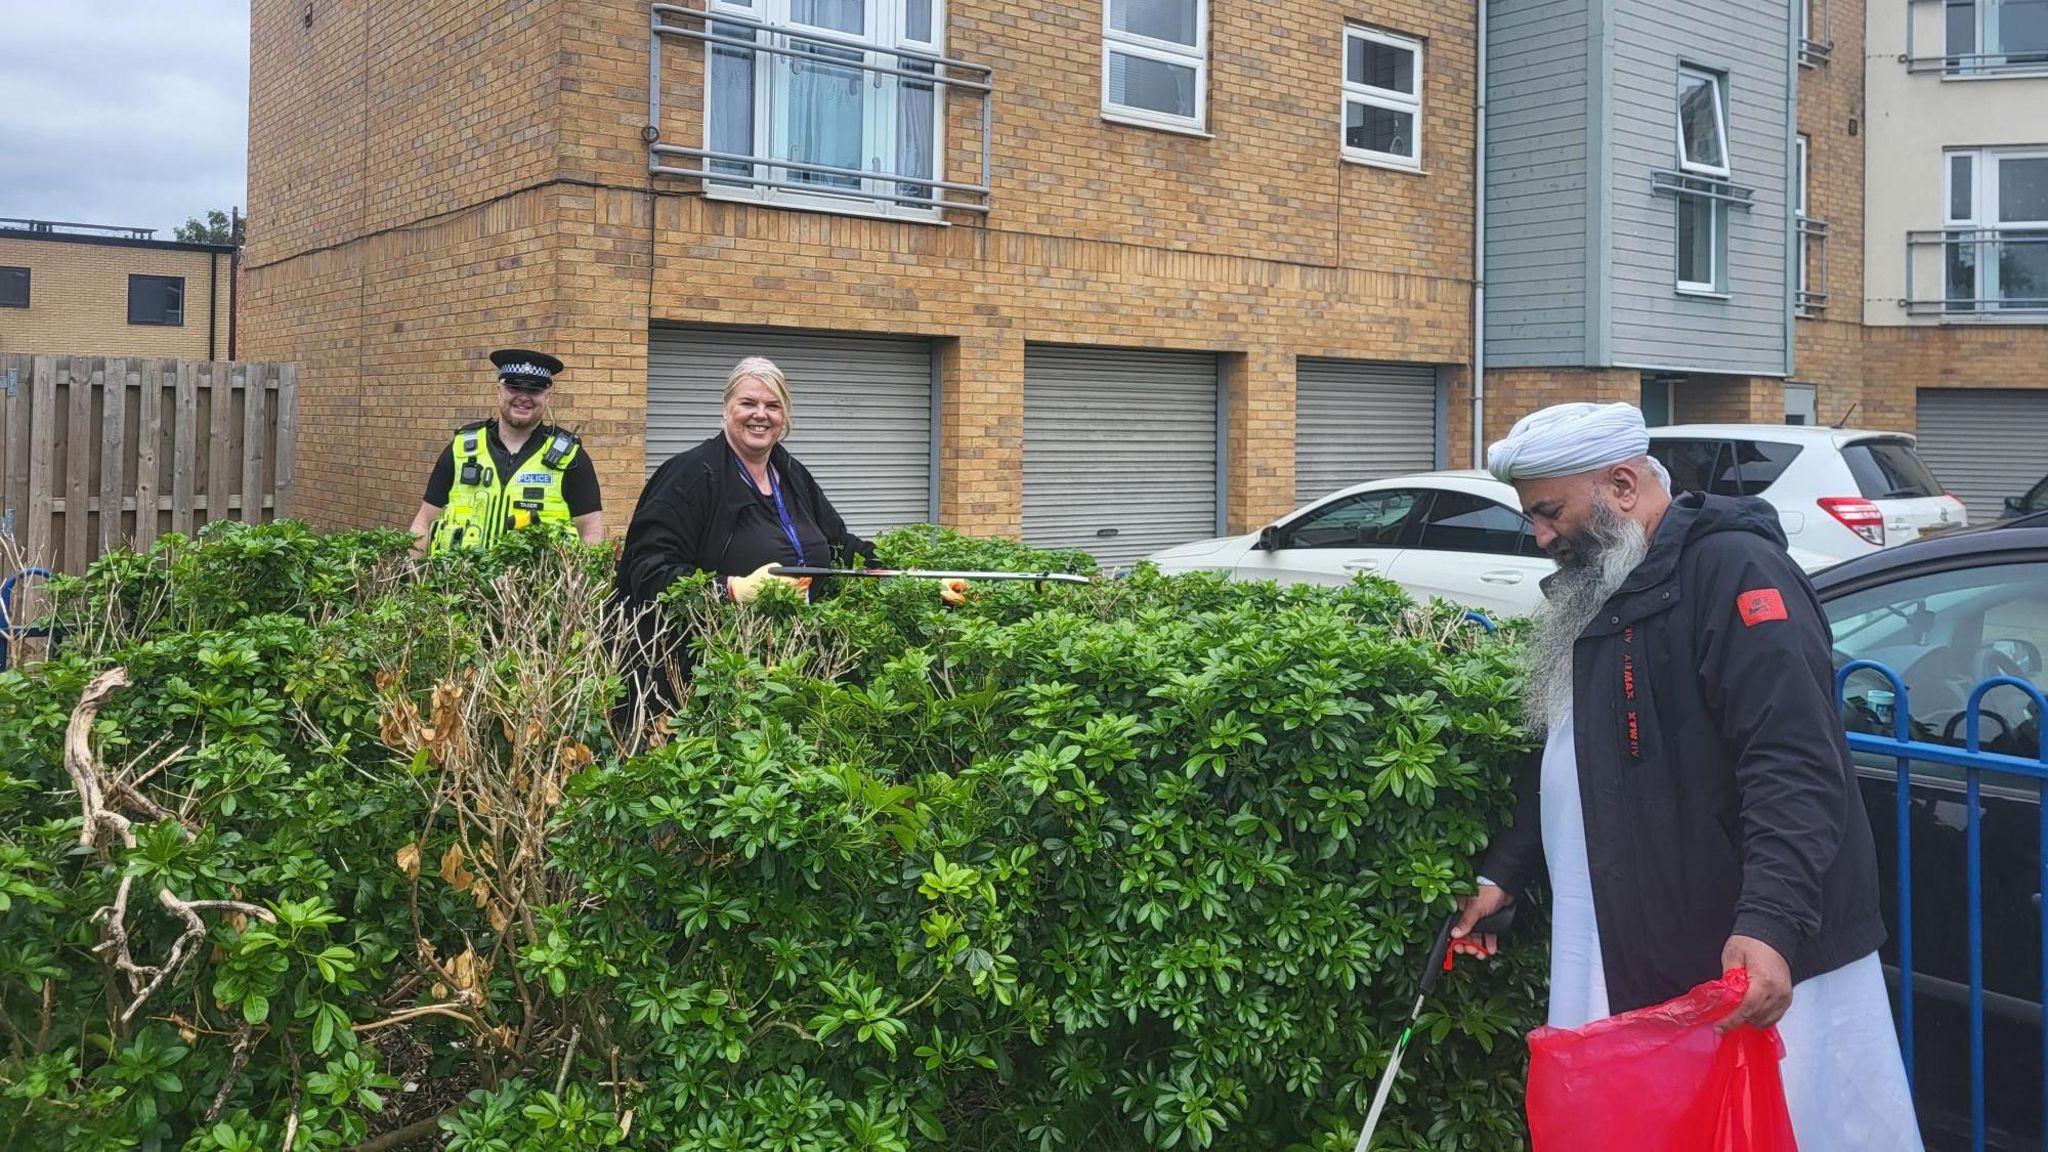 Two people and police officer picking up litter around some bushes